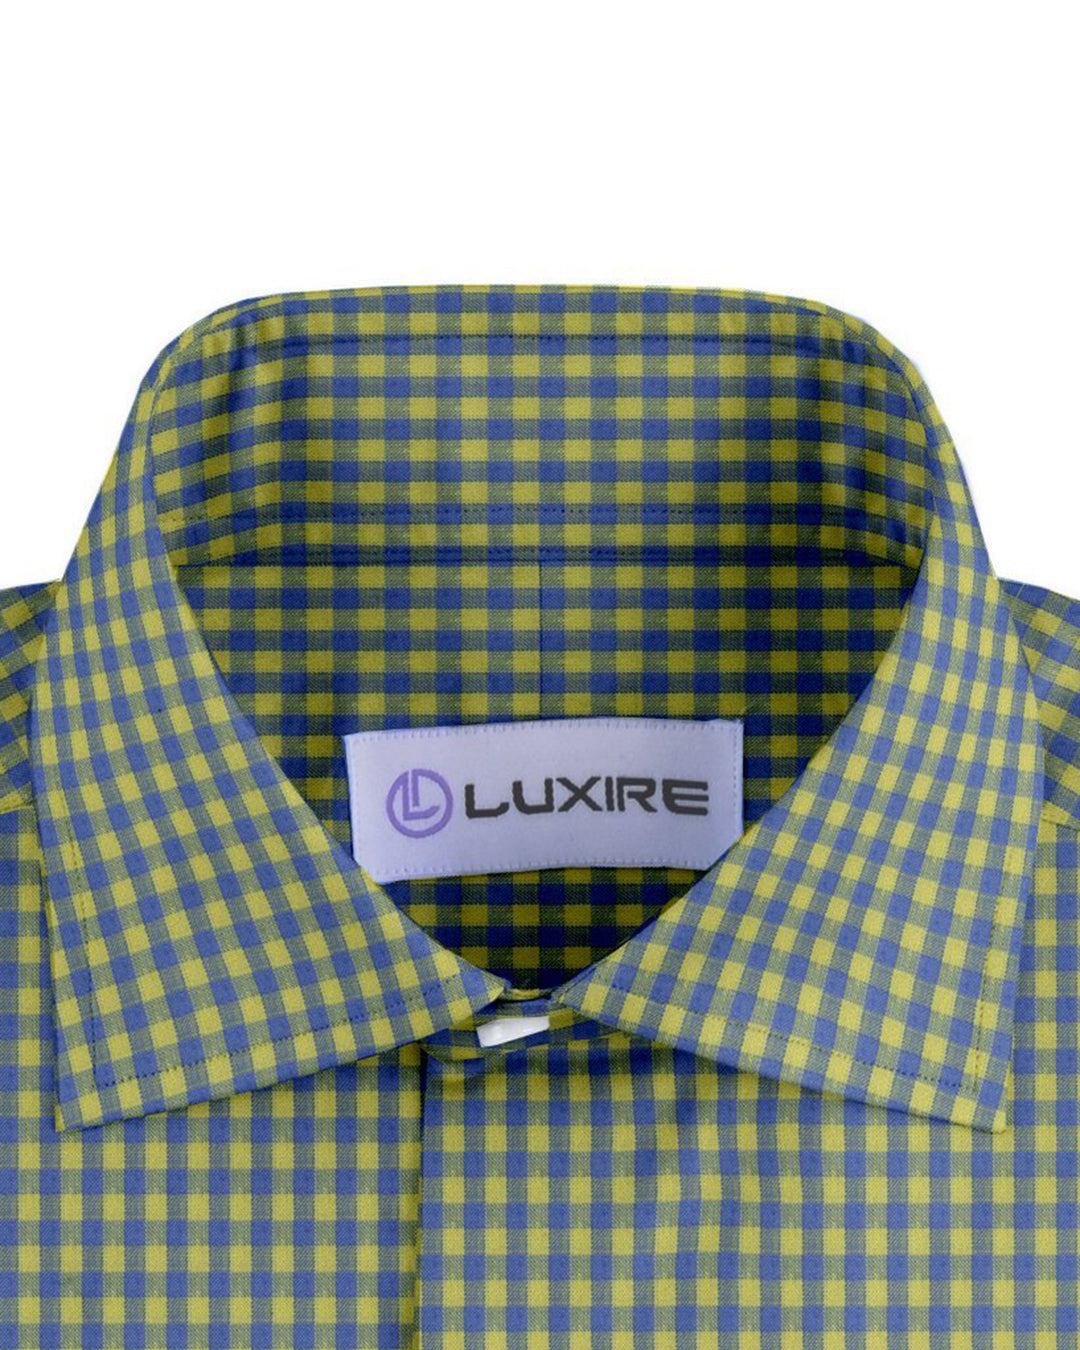 Collar of custom linen shirt for men in yellow and blue gingham